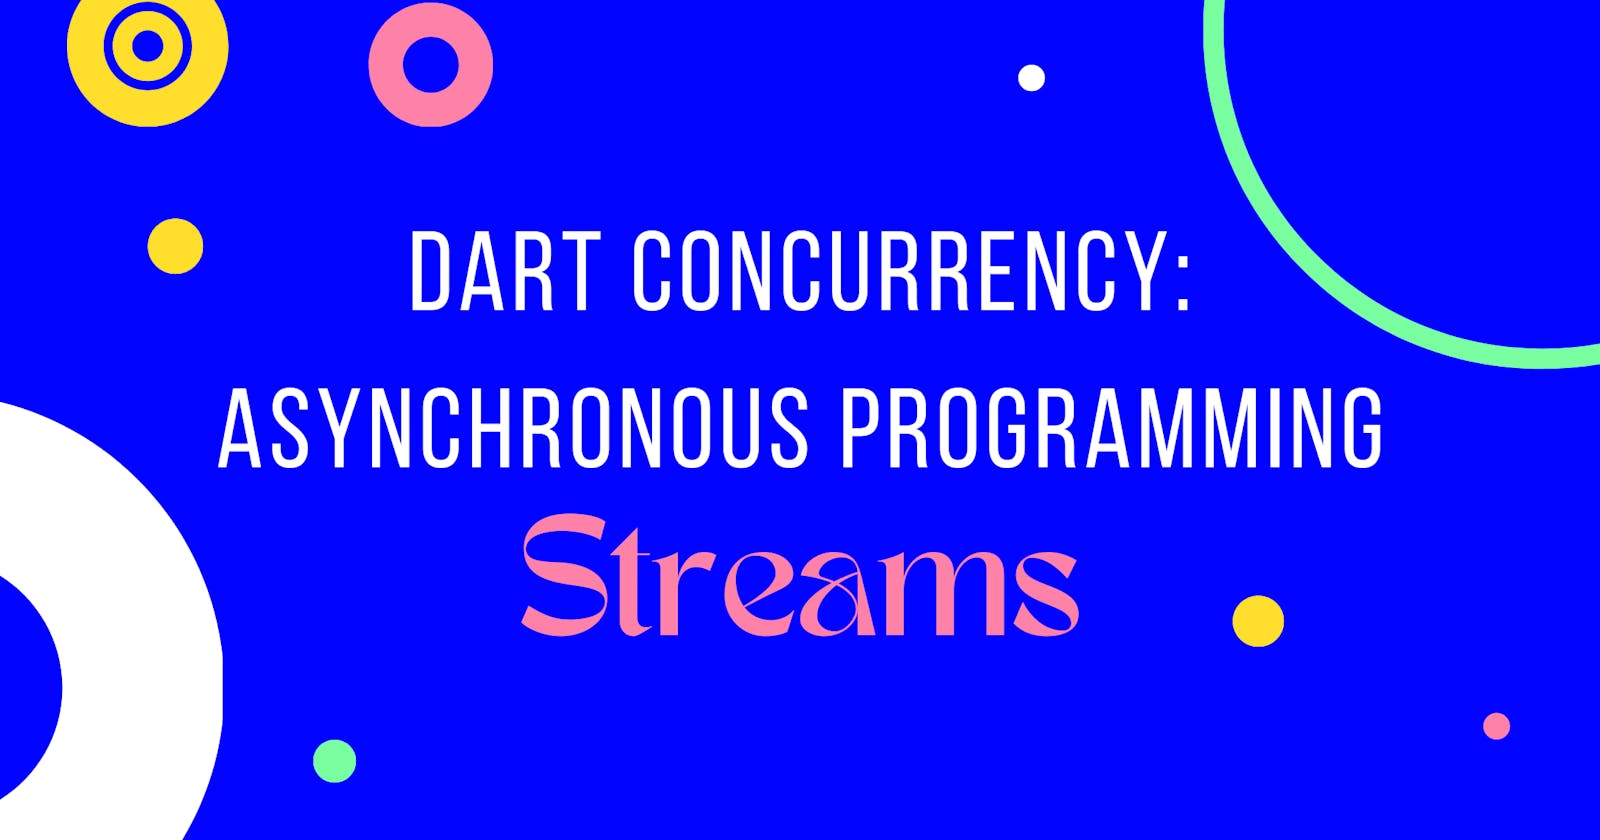 Dart Concurrency: Asynchronous programming